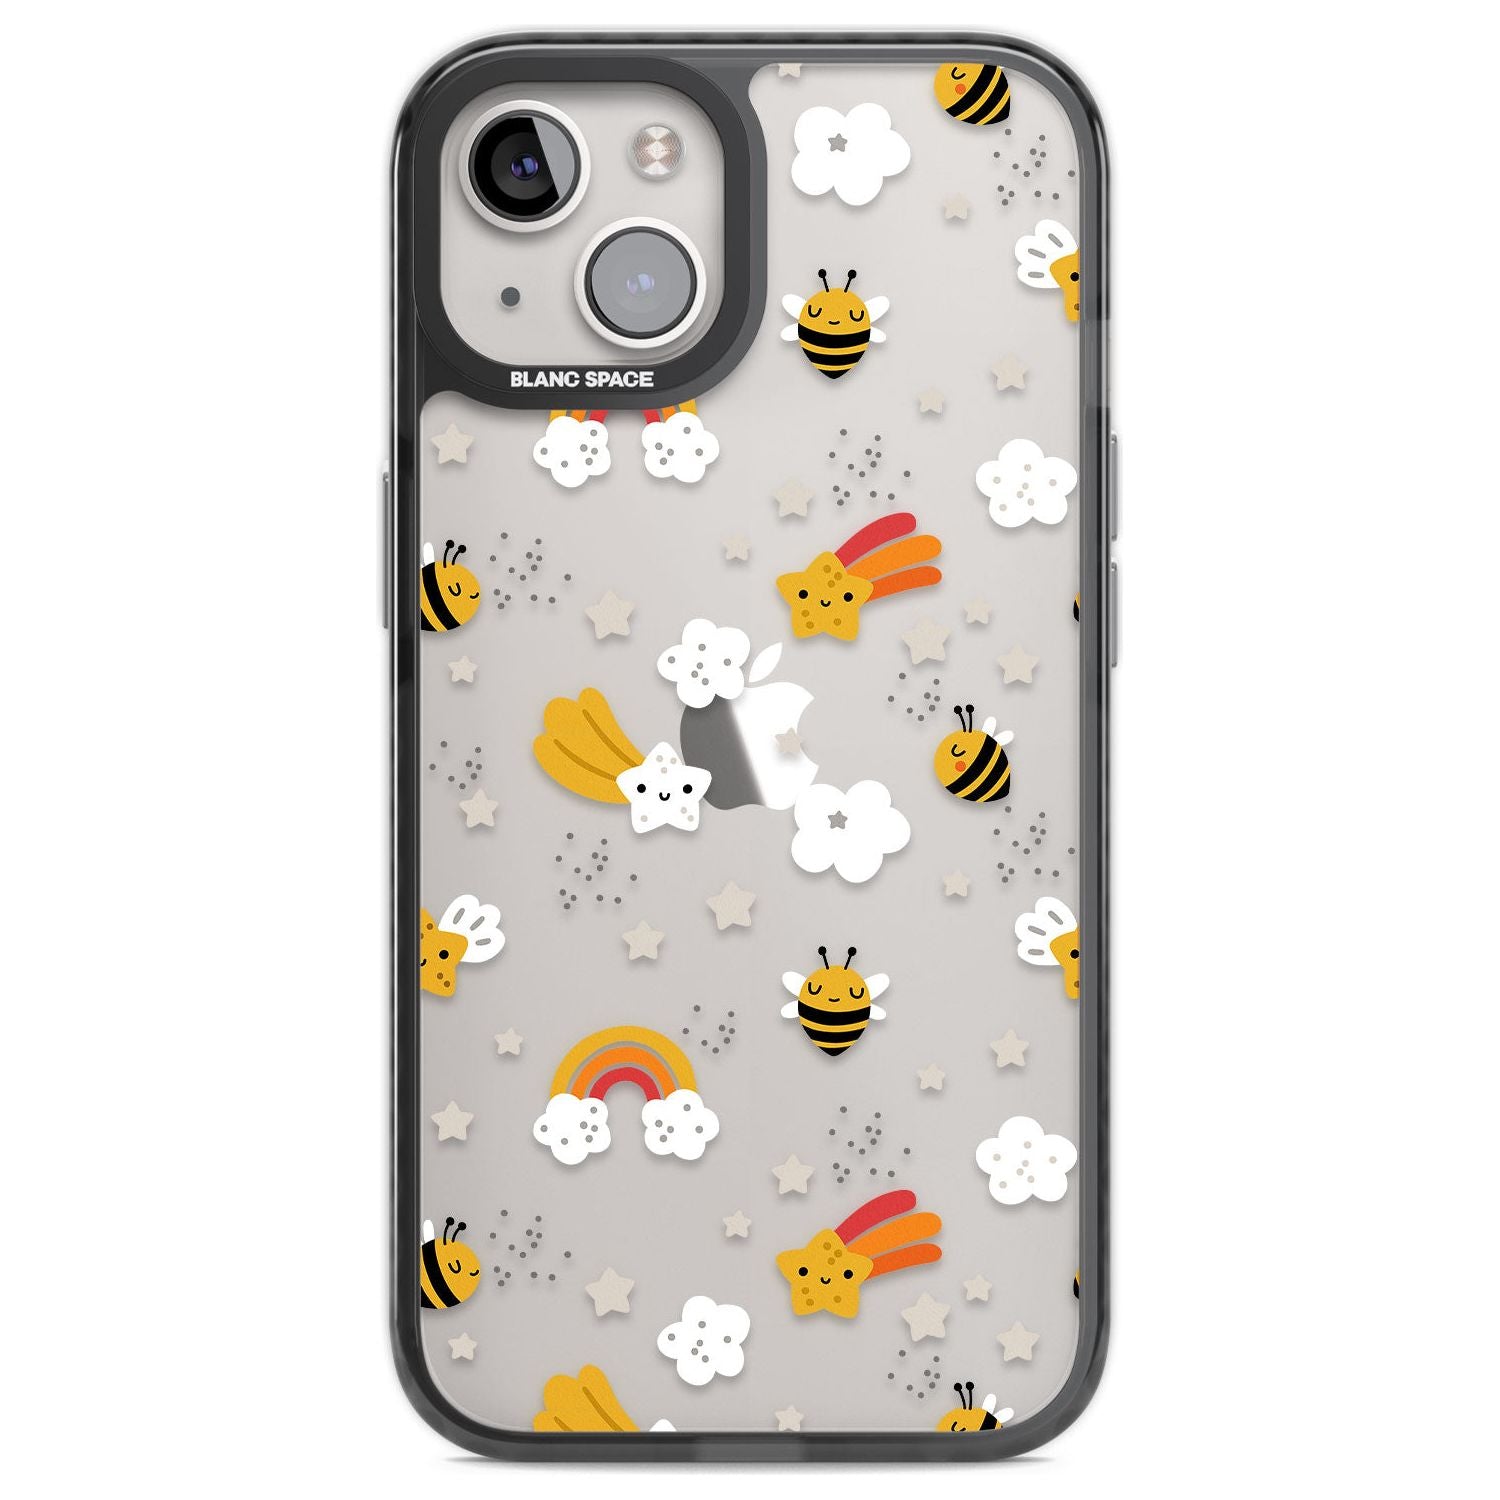 Busy Bee Phone Case iPhone 12 / Black Impact Case,iPhone 13 / Black Impact Case,iPhone 12 Pro / Black Impact Case,iPhone 14 / Black Impact Case,iPhone 15 Plus / Black Impact Case,iPhone 15 / Black Impact Case Blanc Space